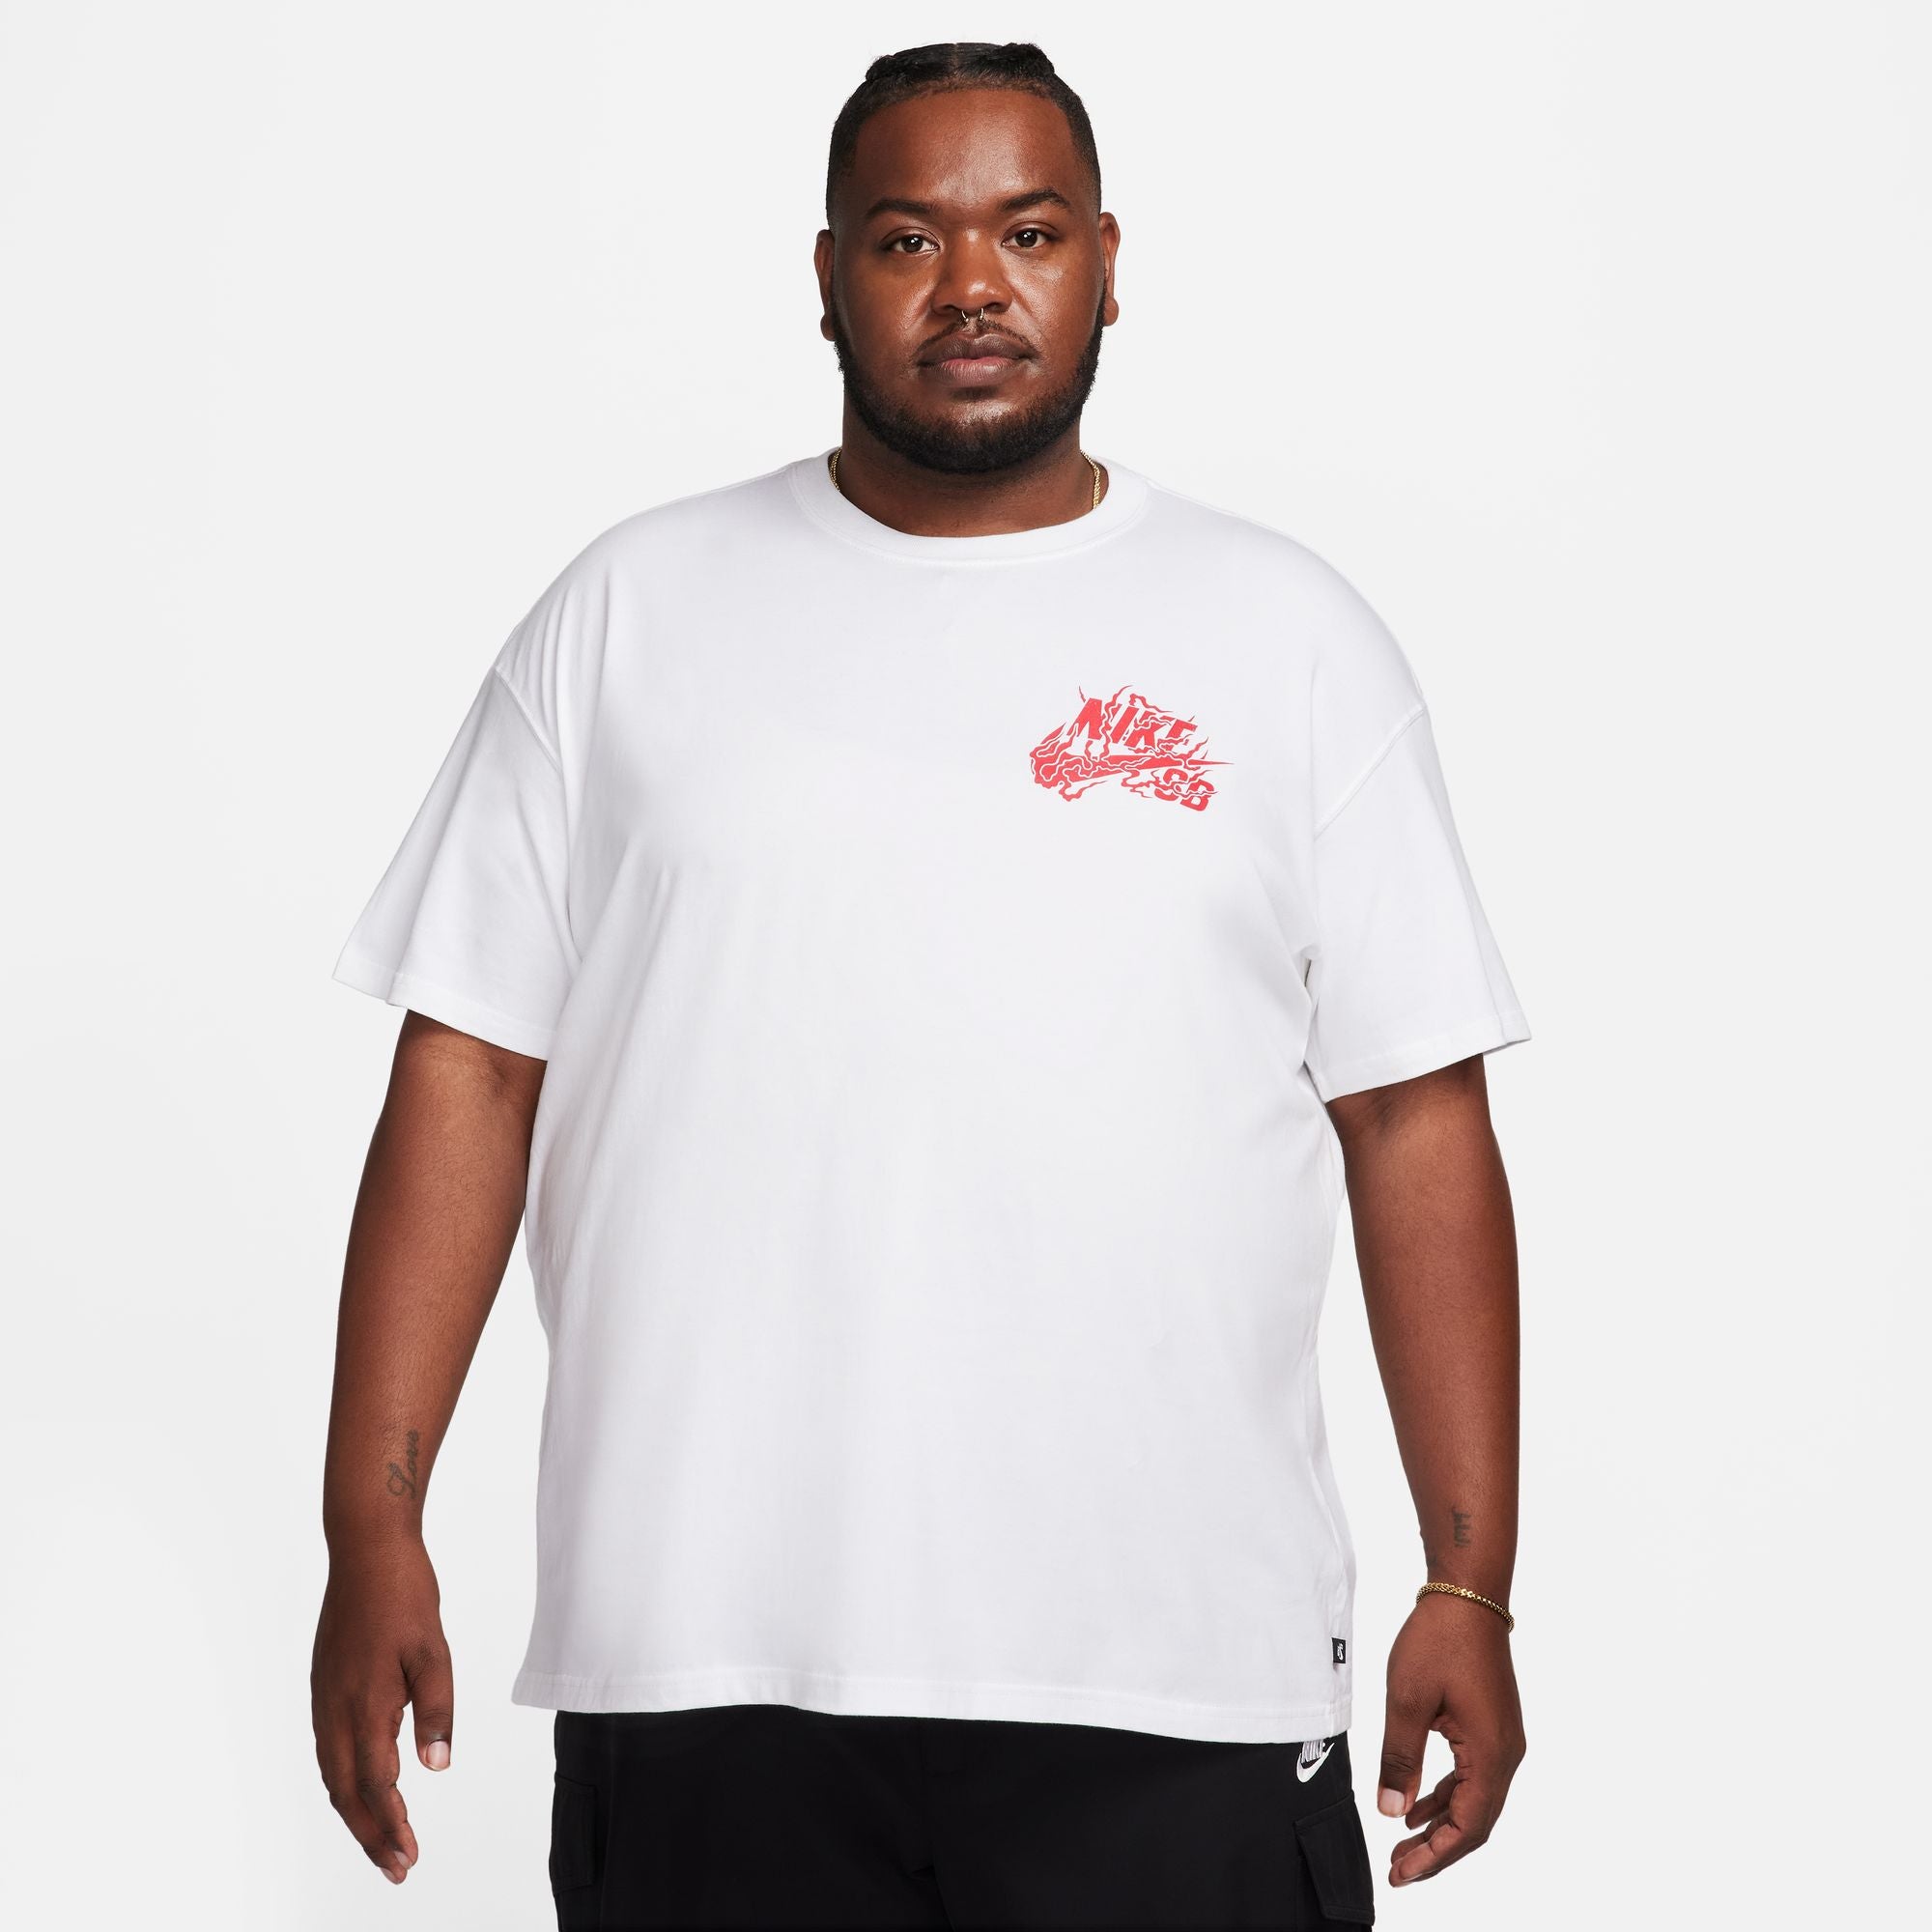 White nike short sleeve t-shirt with red swoosh logo on front and red dragon graphic on back. Free uk shipping for orders over £50